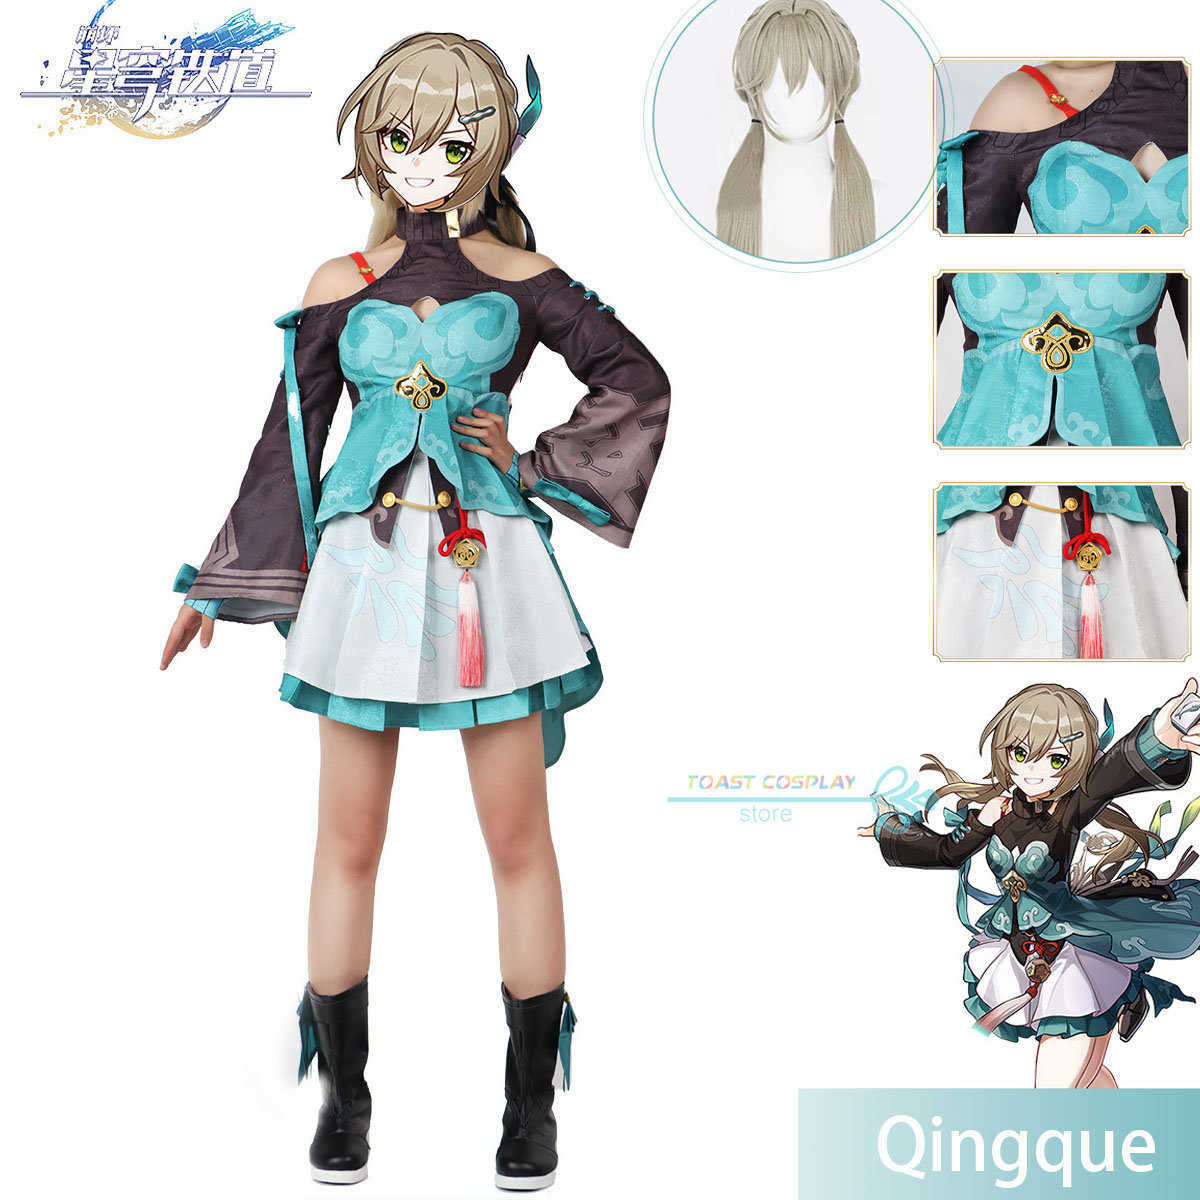 

Anime Costumes Game Honkai Star Rail Cosplay Comes Qingque Cosplay Wig Uniform Gorgeous Dress Qing Que Wig Halloween Party Cos for Women Z0602